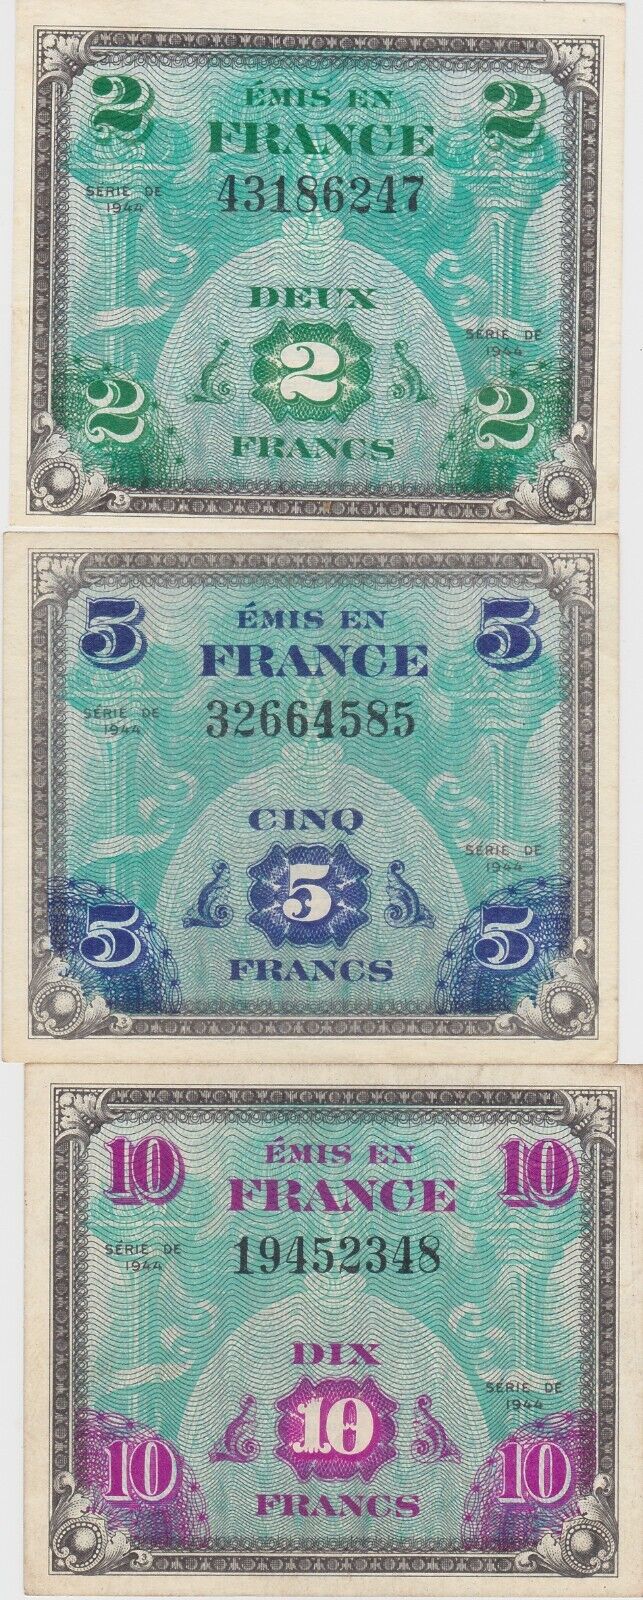 Kappys W70578 1944 Wwii  French Allied Mltary Payment Certificates 2 5 10 Francs